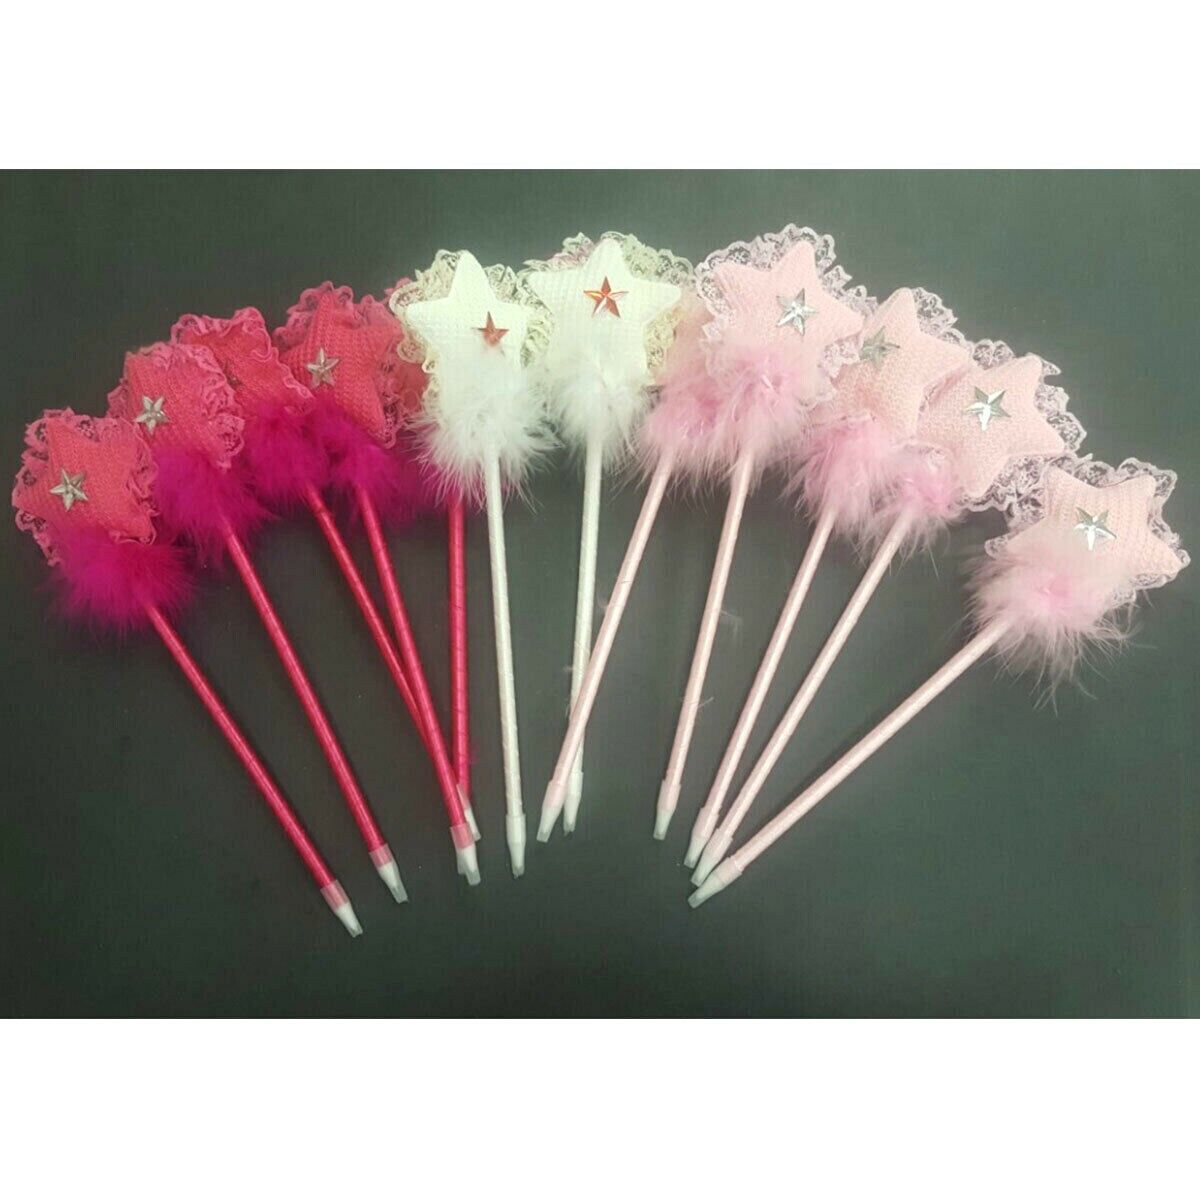 12 pieces Star Feather Ribbon Ballpoint School Office Birthday Party Gift Lots